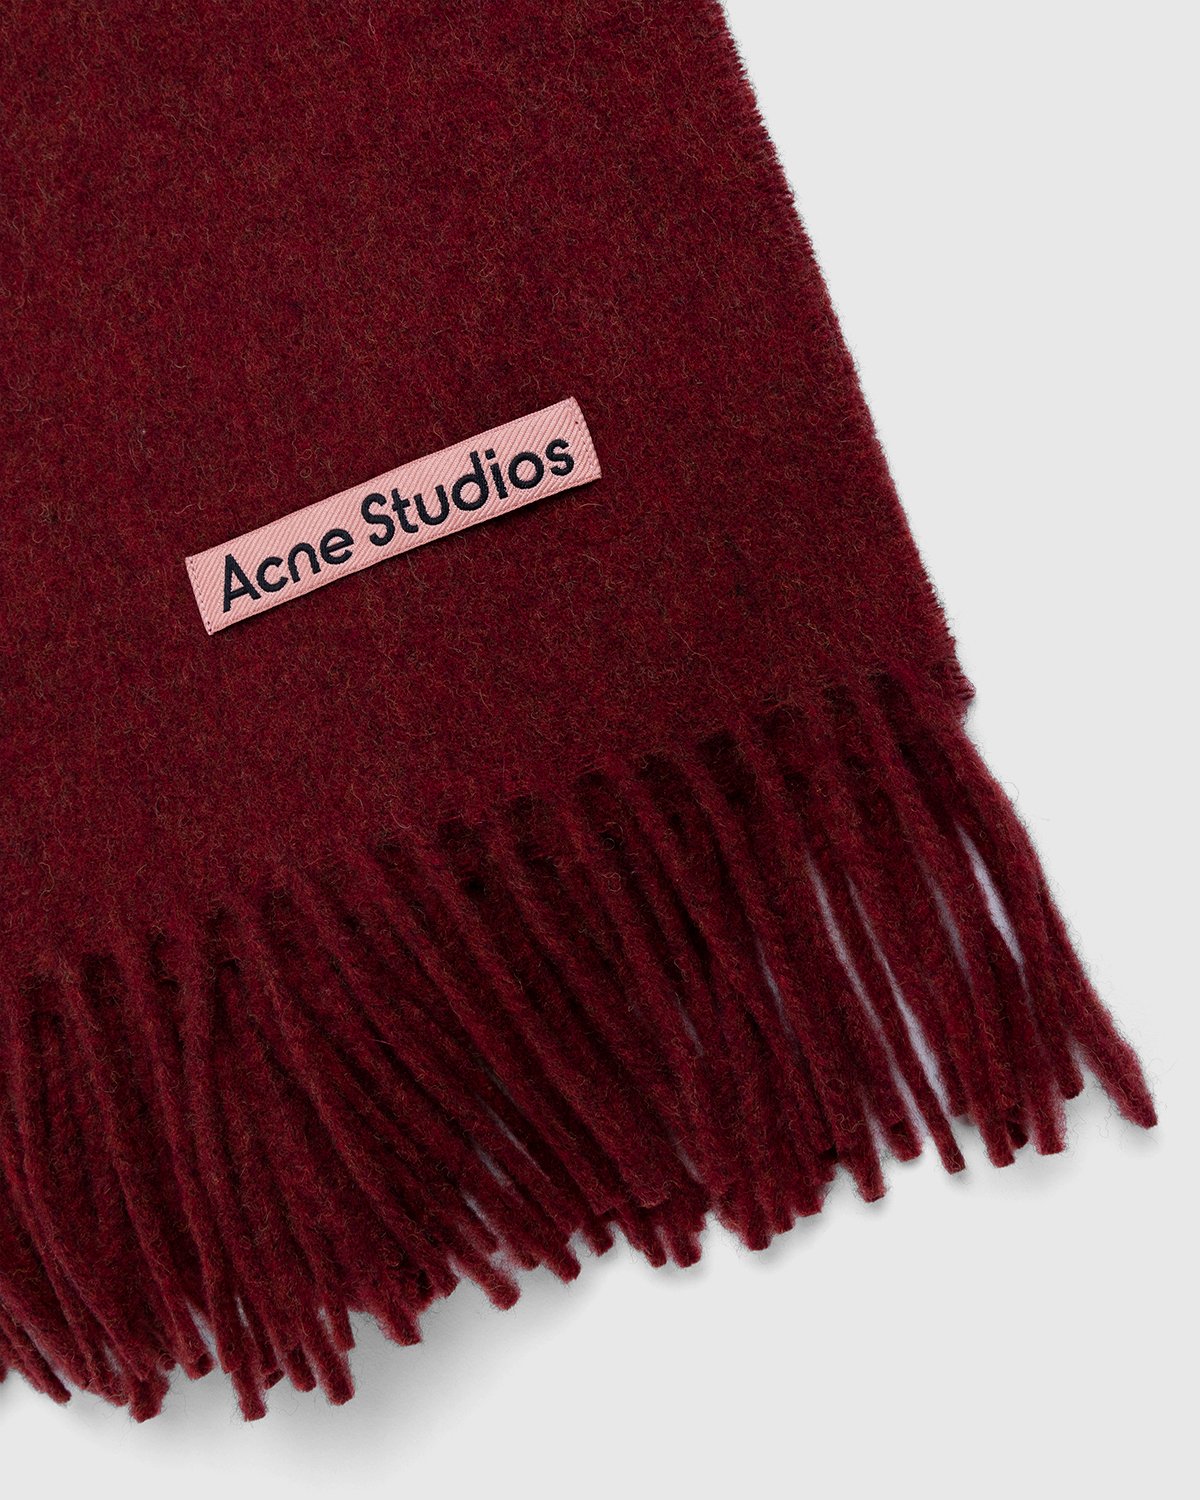 Acne Studios - Canada Narrow Scarf Red Melange - Accessories - Red - Image 3